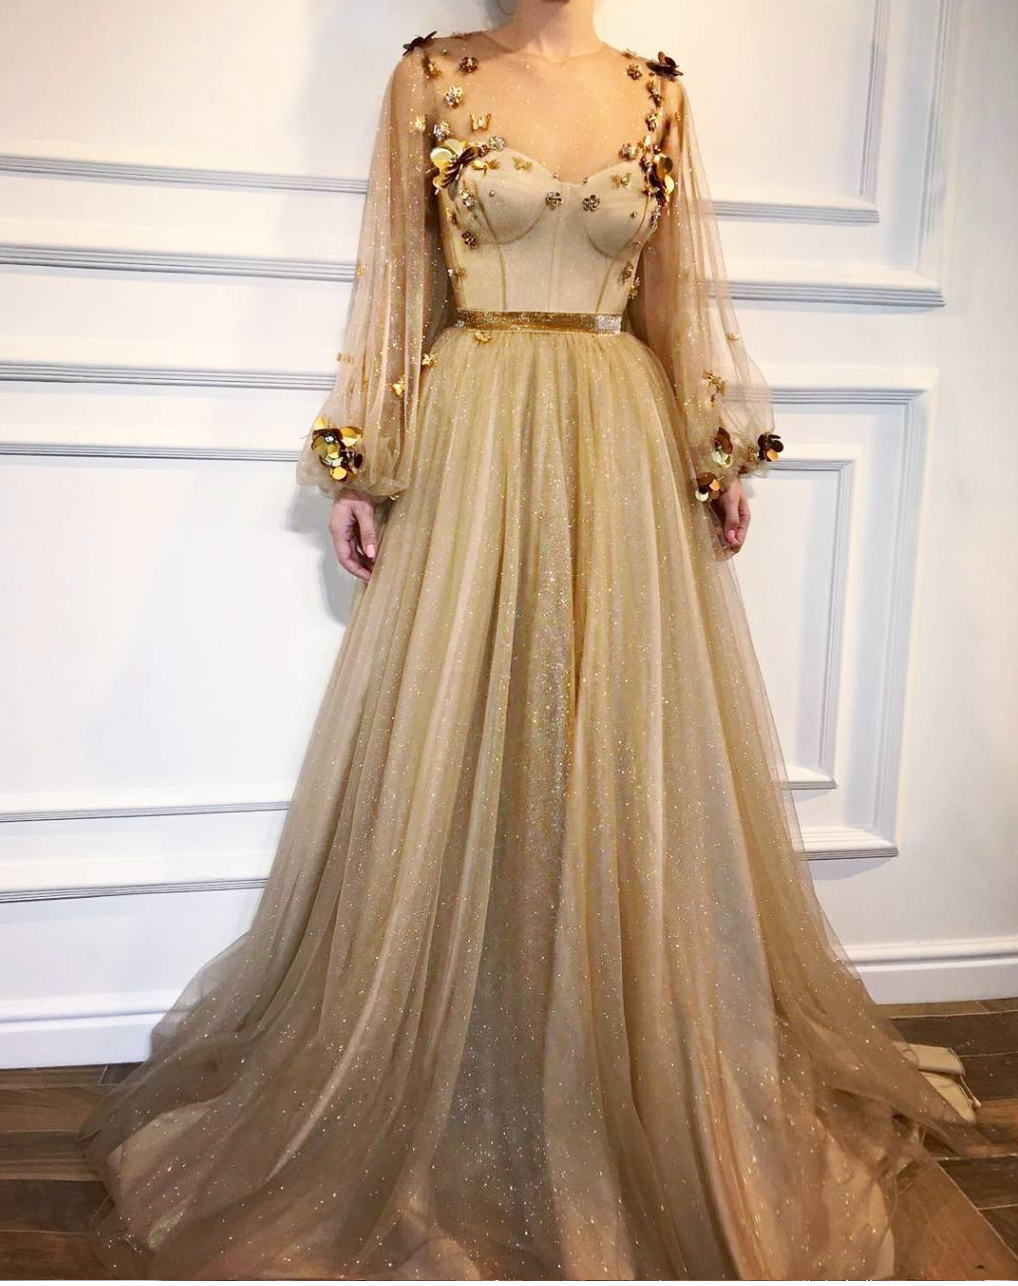 Gold A-Line dress with long sleeves and embroidery